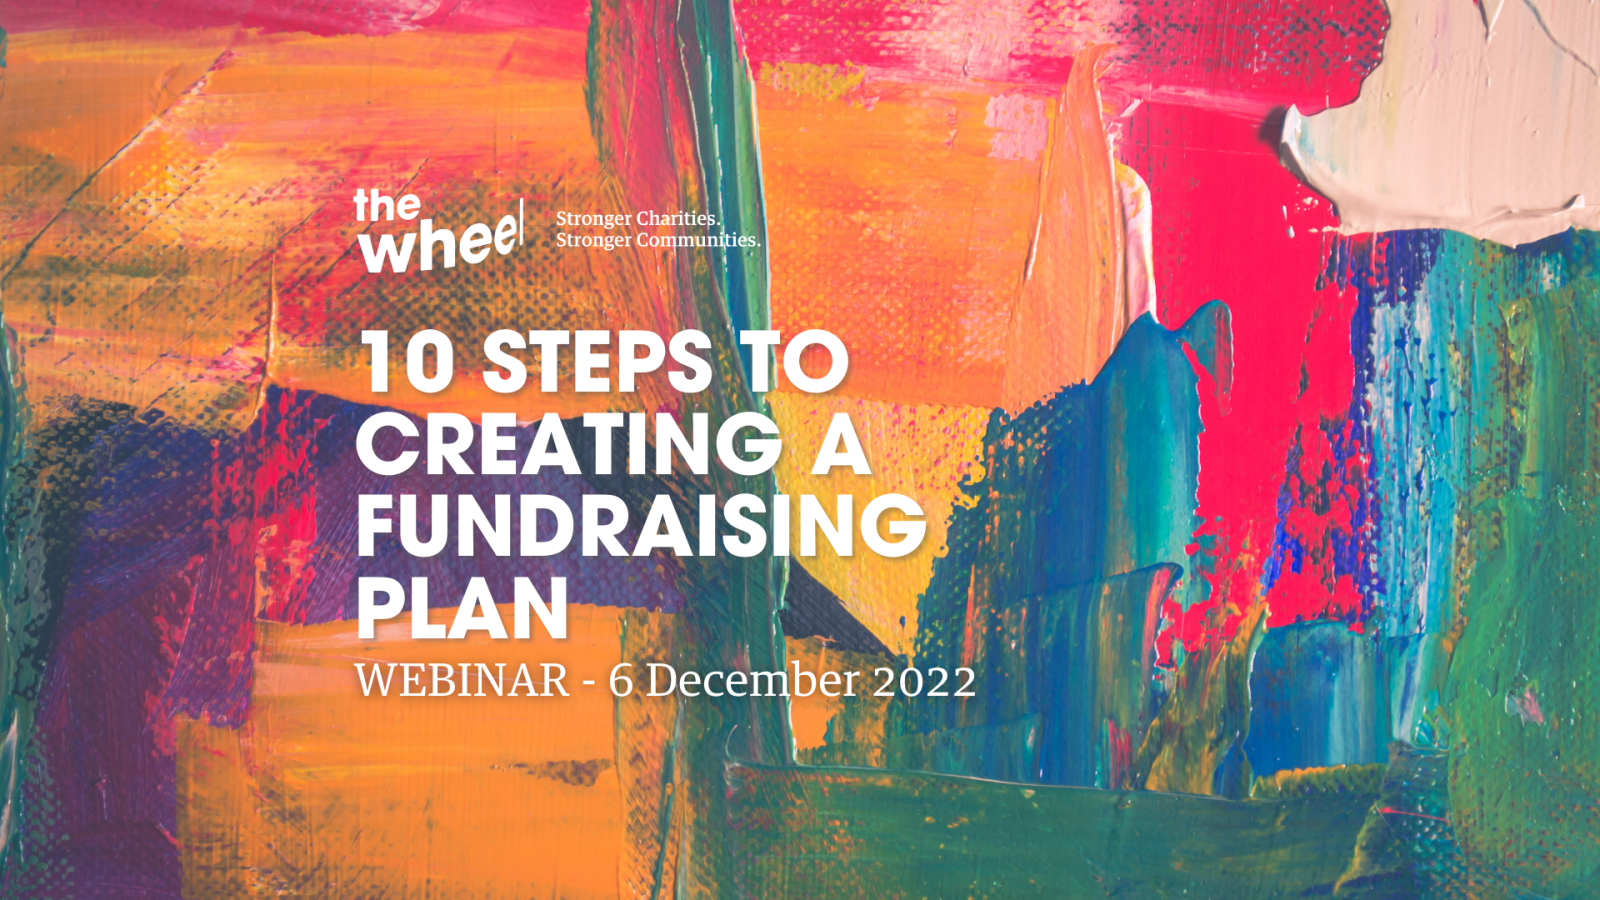 10 Steps to Creating a Fundraising Plan (6 December 2022)